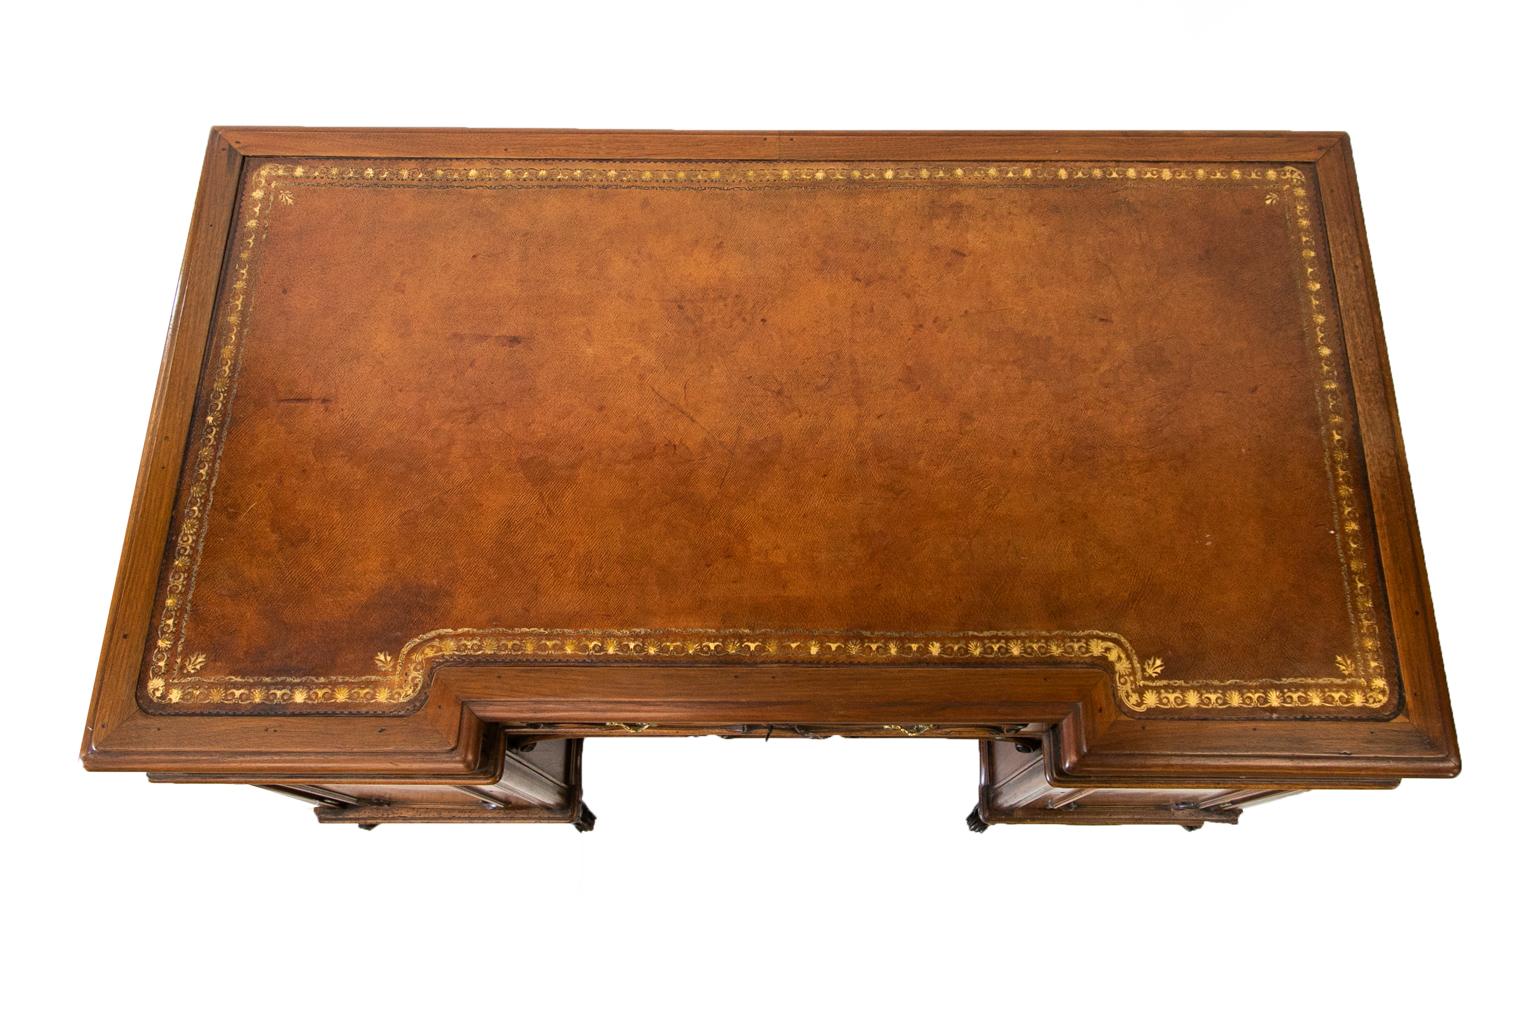 English walnut two pedestal desk has a recessed center and a brown gold tooled leather top.